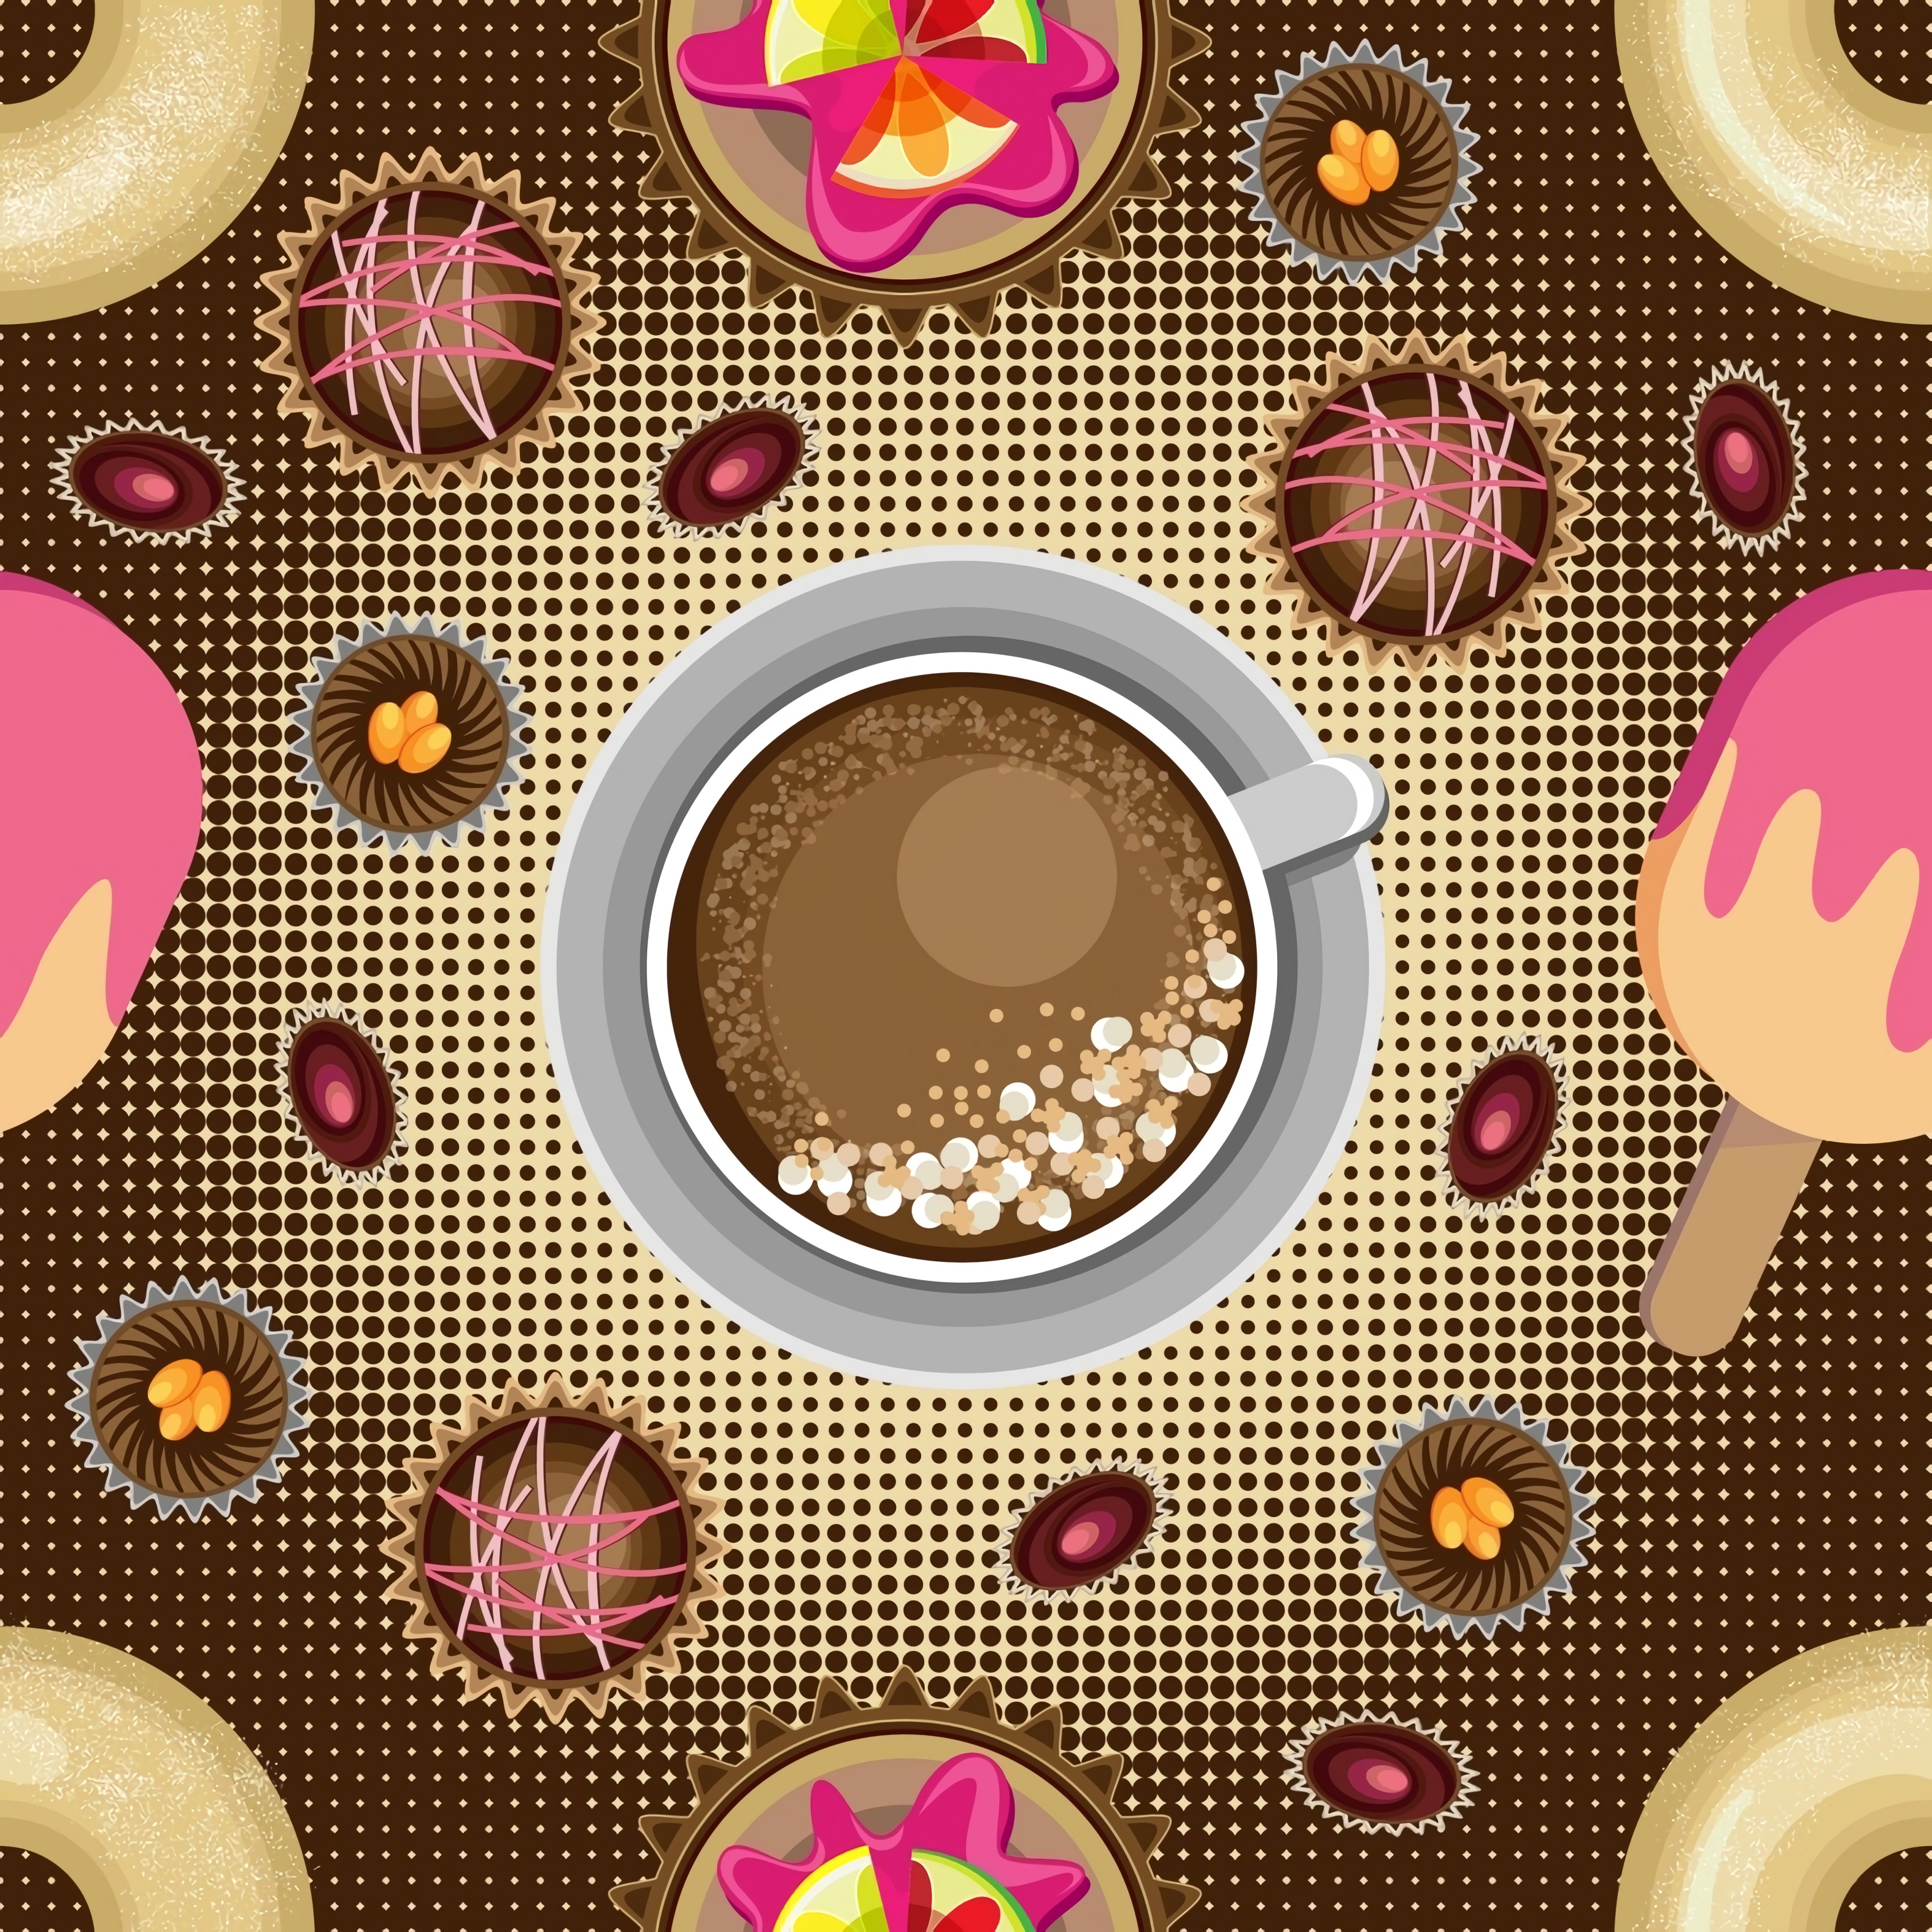 87933 Screensavers and Wallpapers Cappuccino for phone. Download art, desert, candies, cup, cappuccino pictures for free